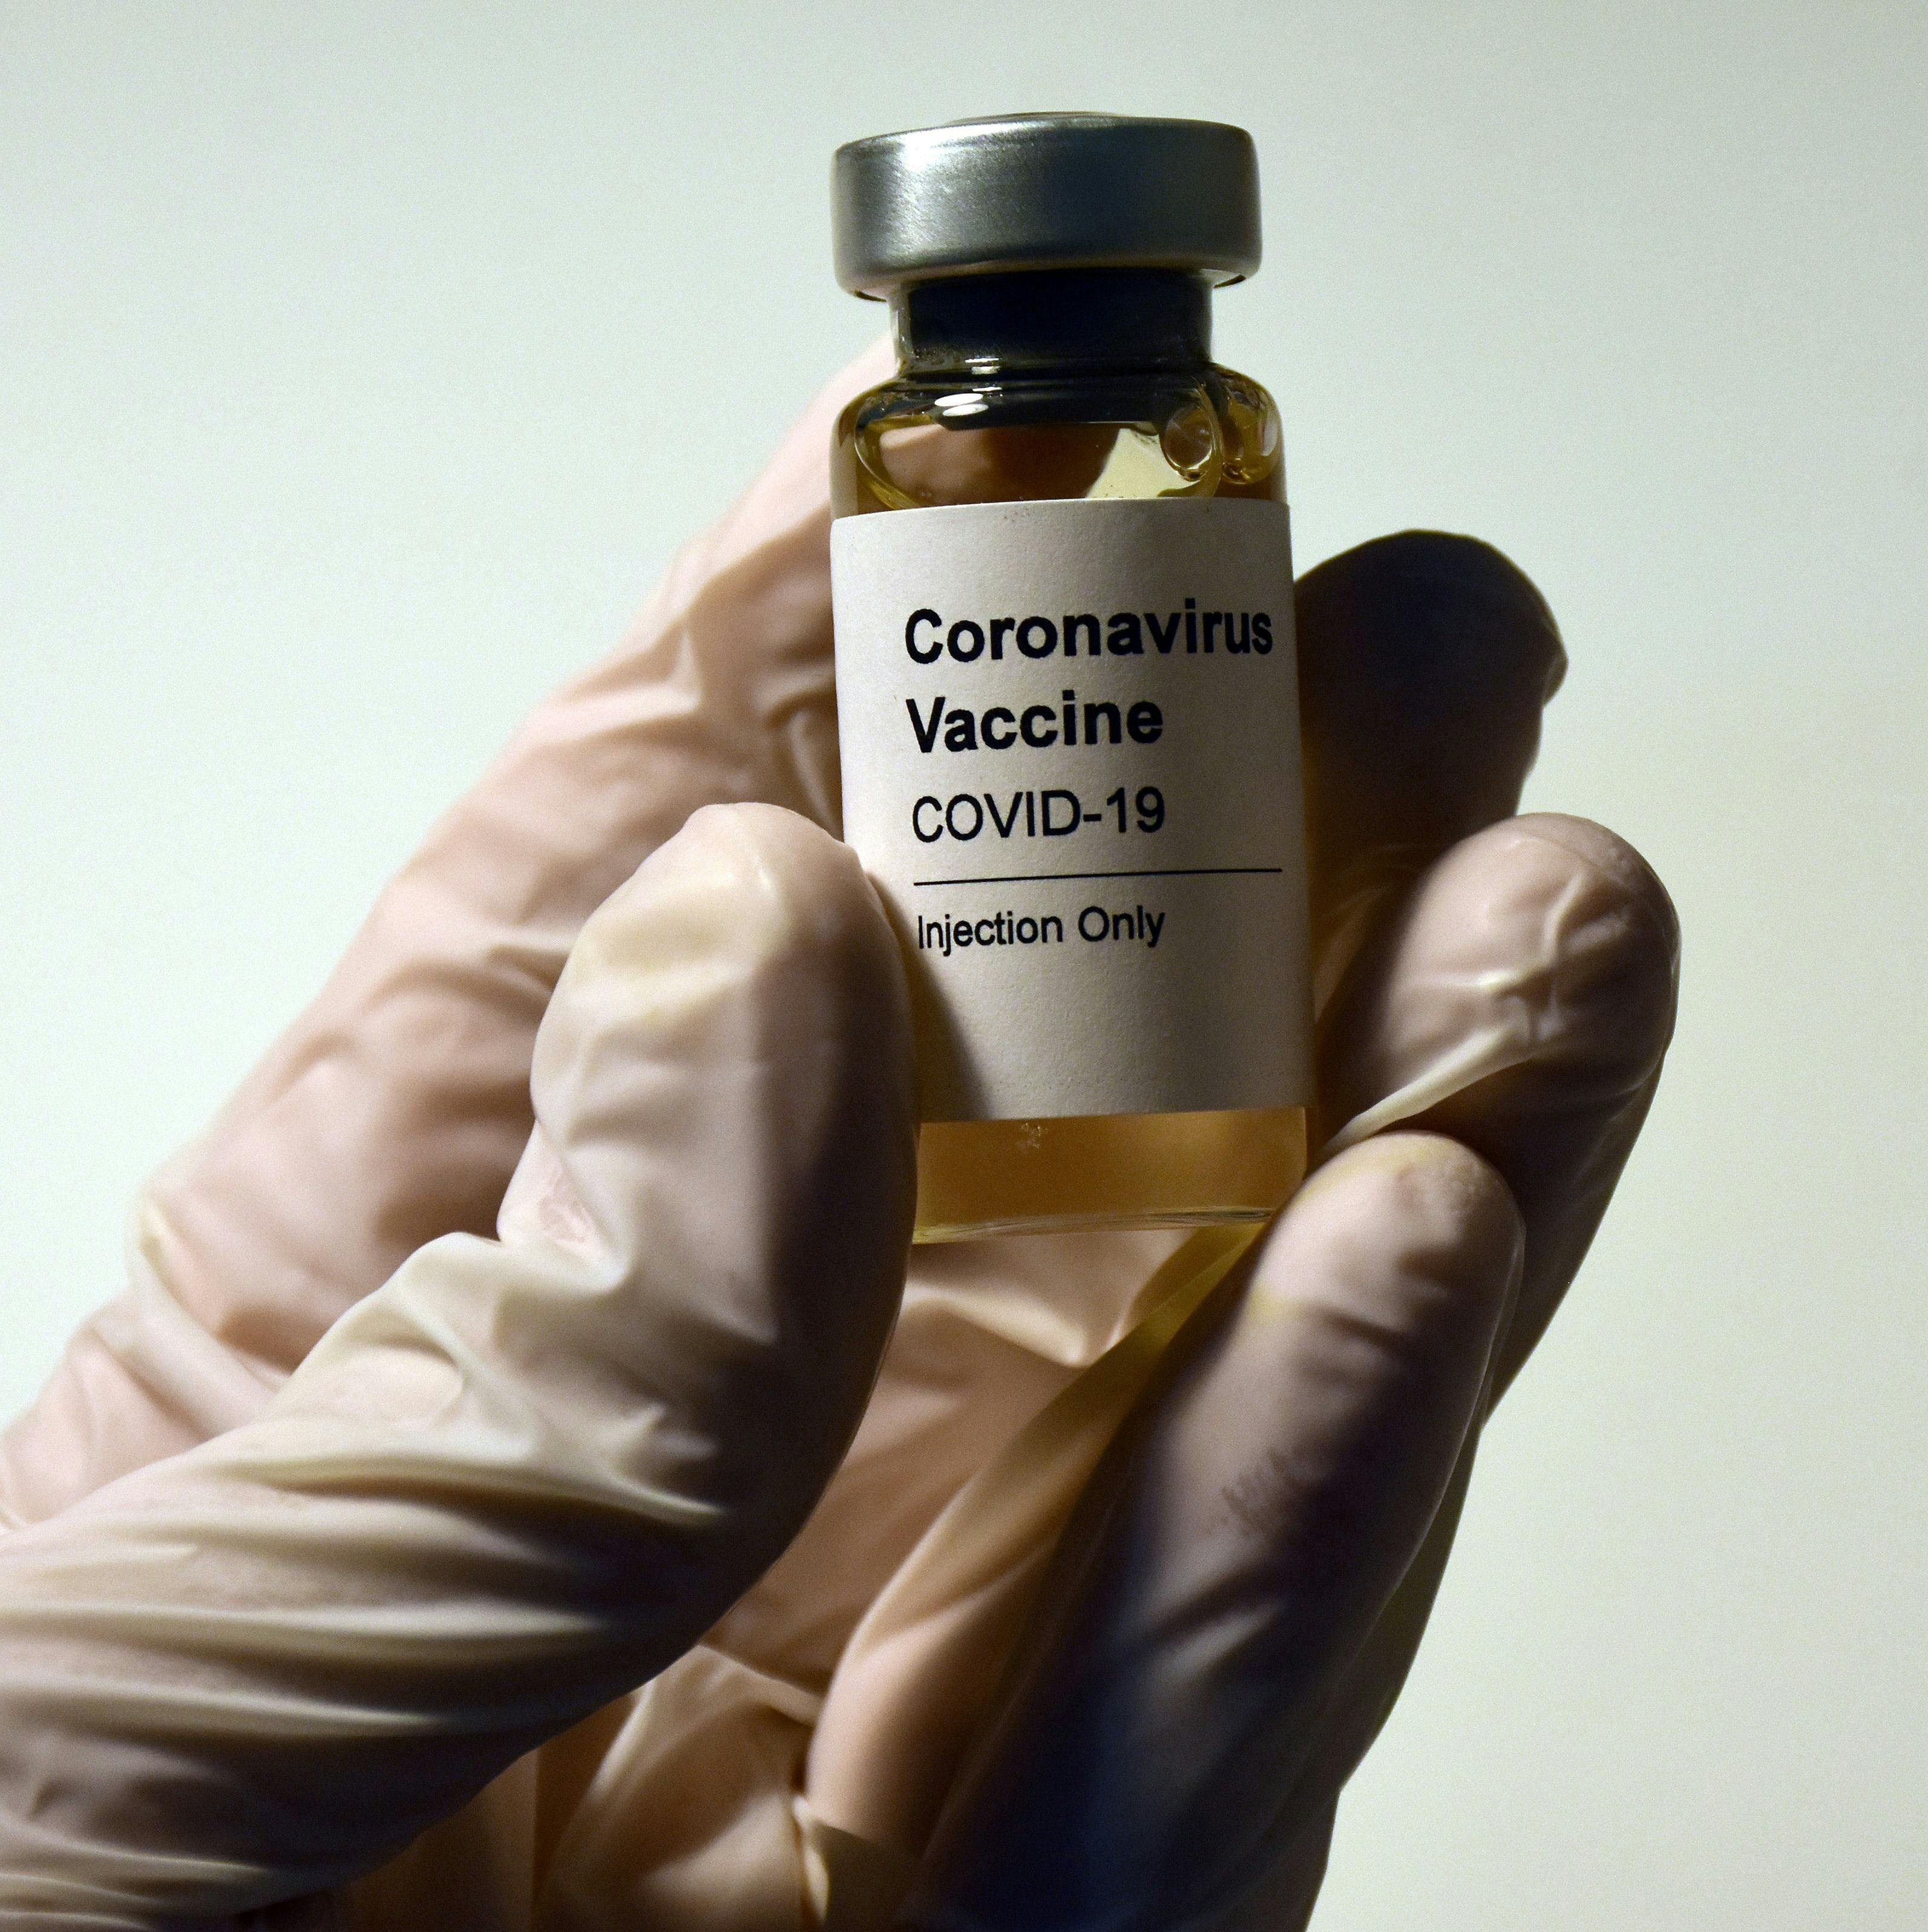 Report: No COVID-19 Vaccine Federal Reserve Exists